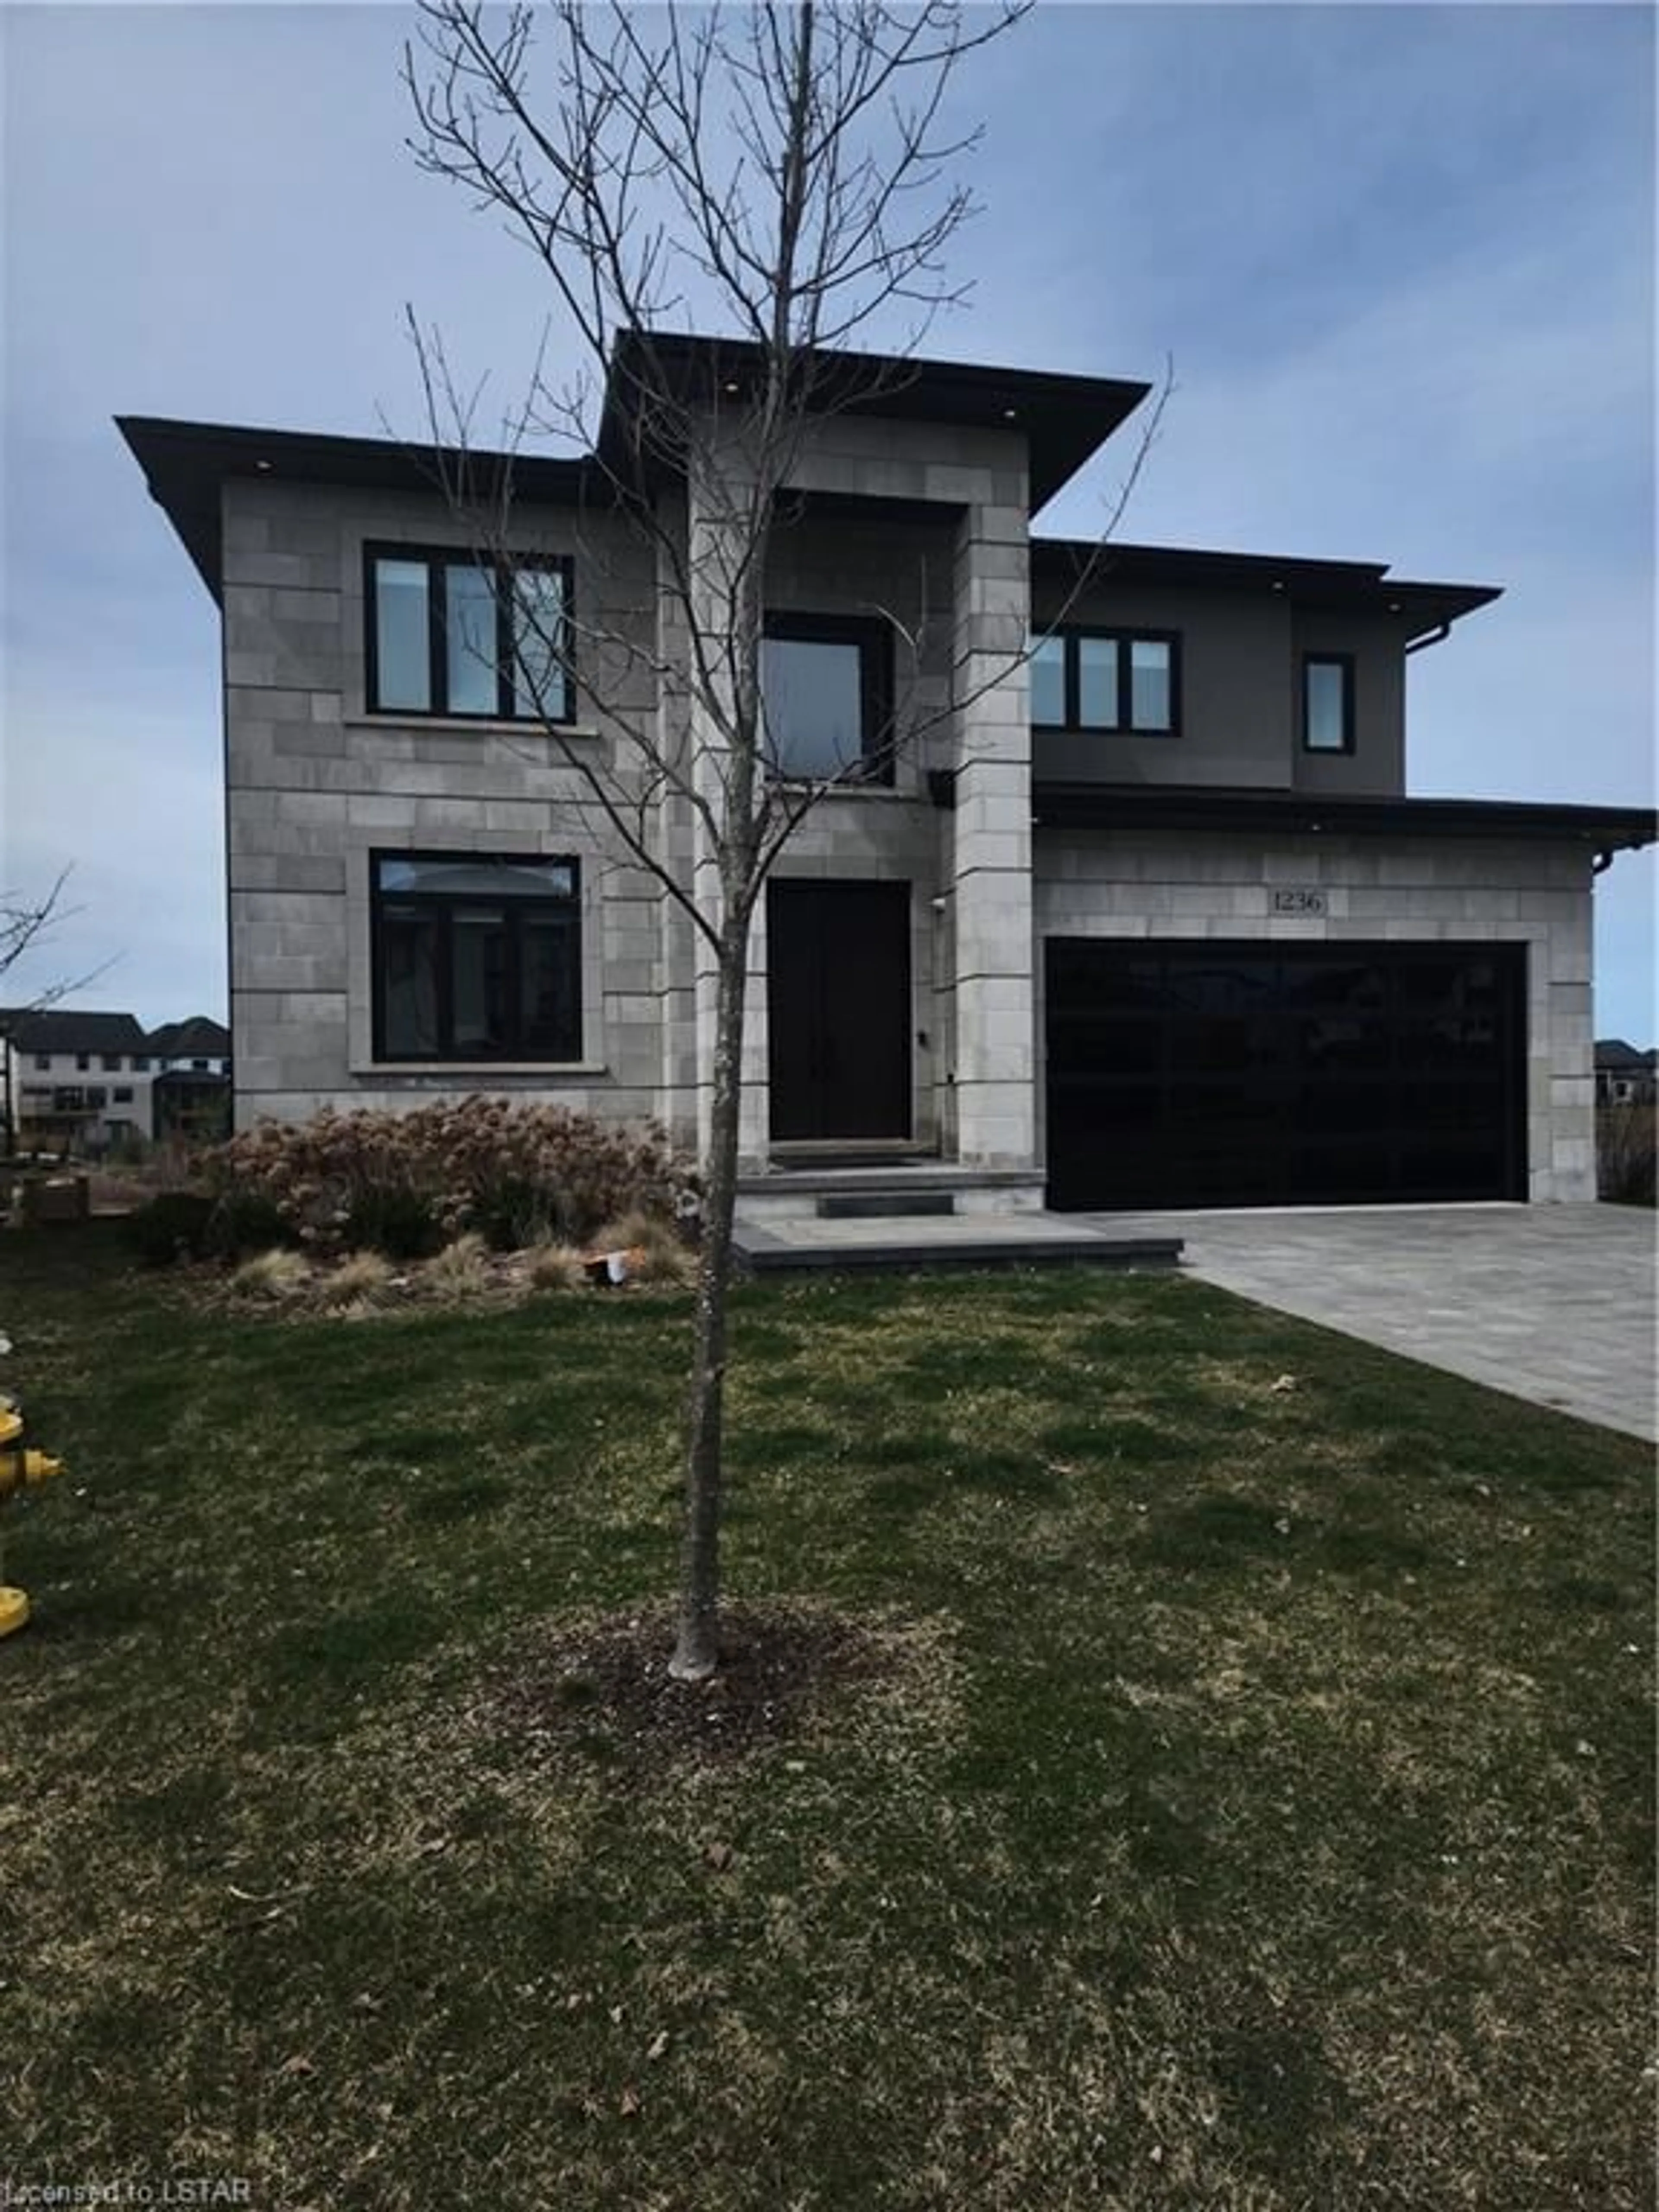 Home with brick exterior material for 1236 Silverfox Dr, London Ontario N6G 0V8